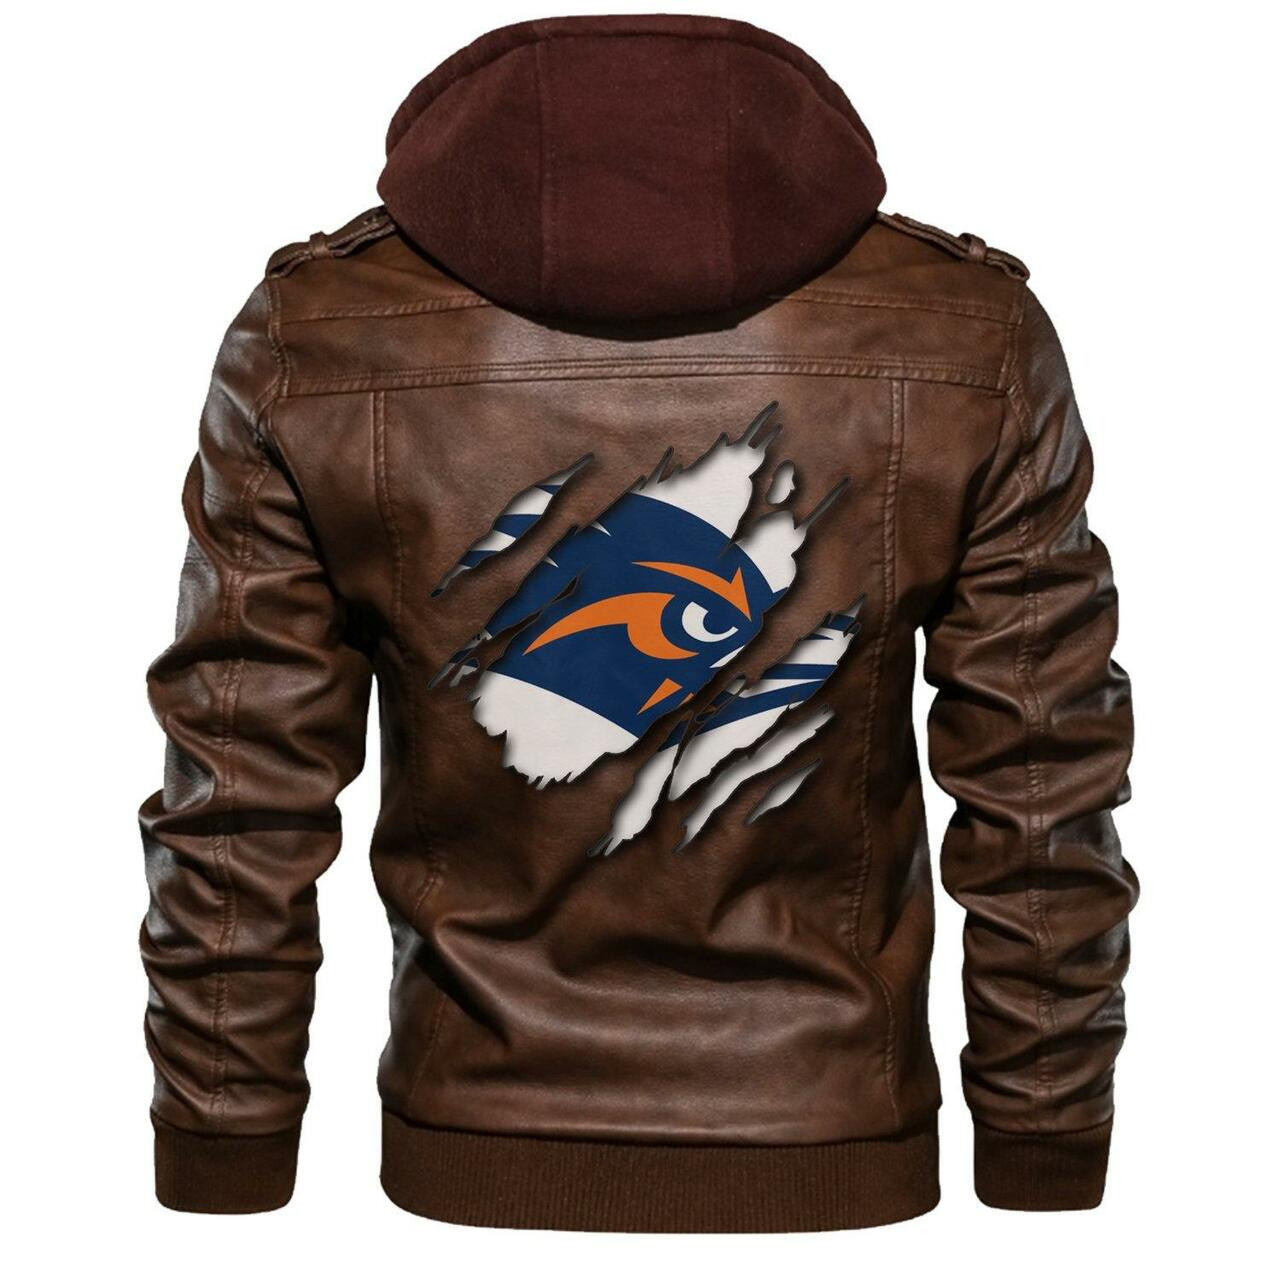 Check out and find the right leather jacket below 31